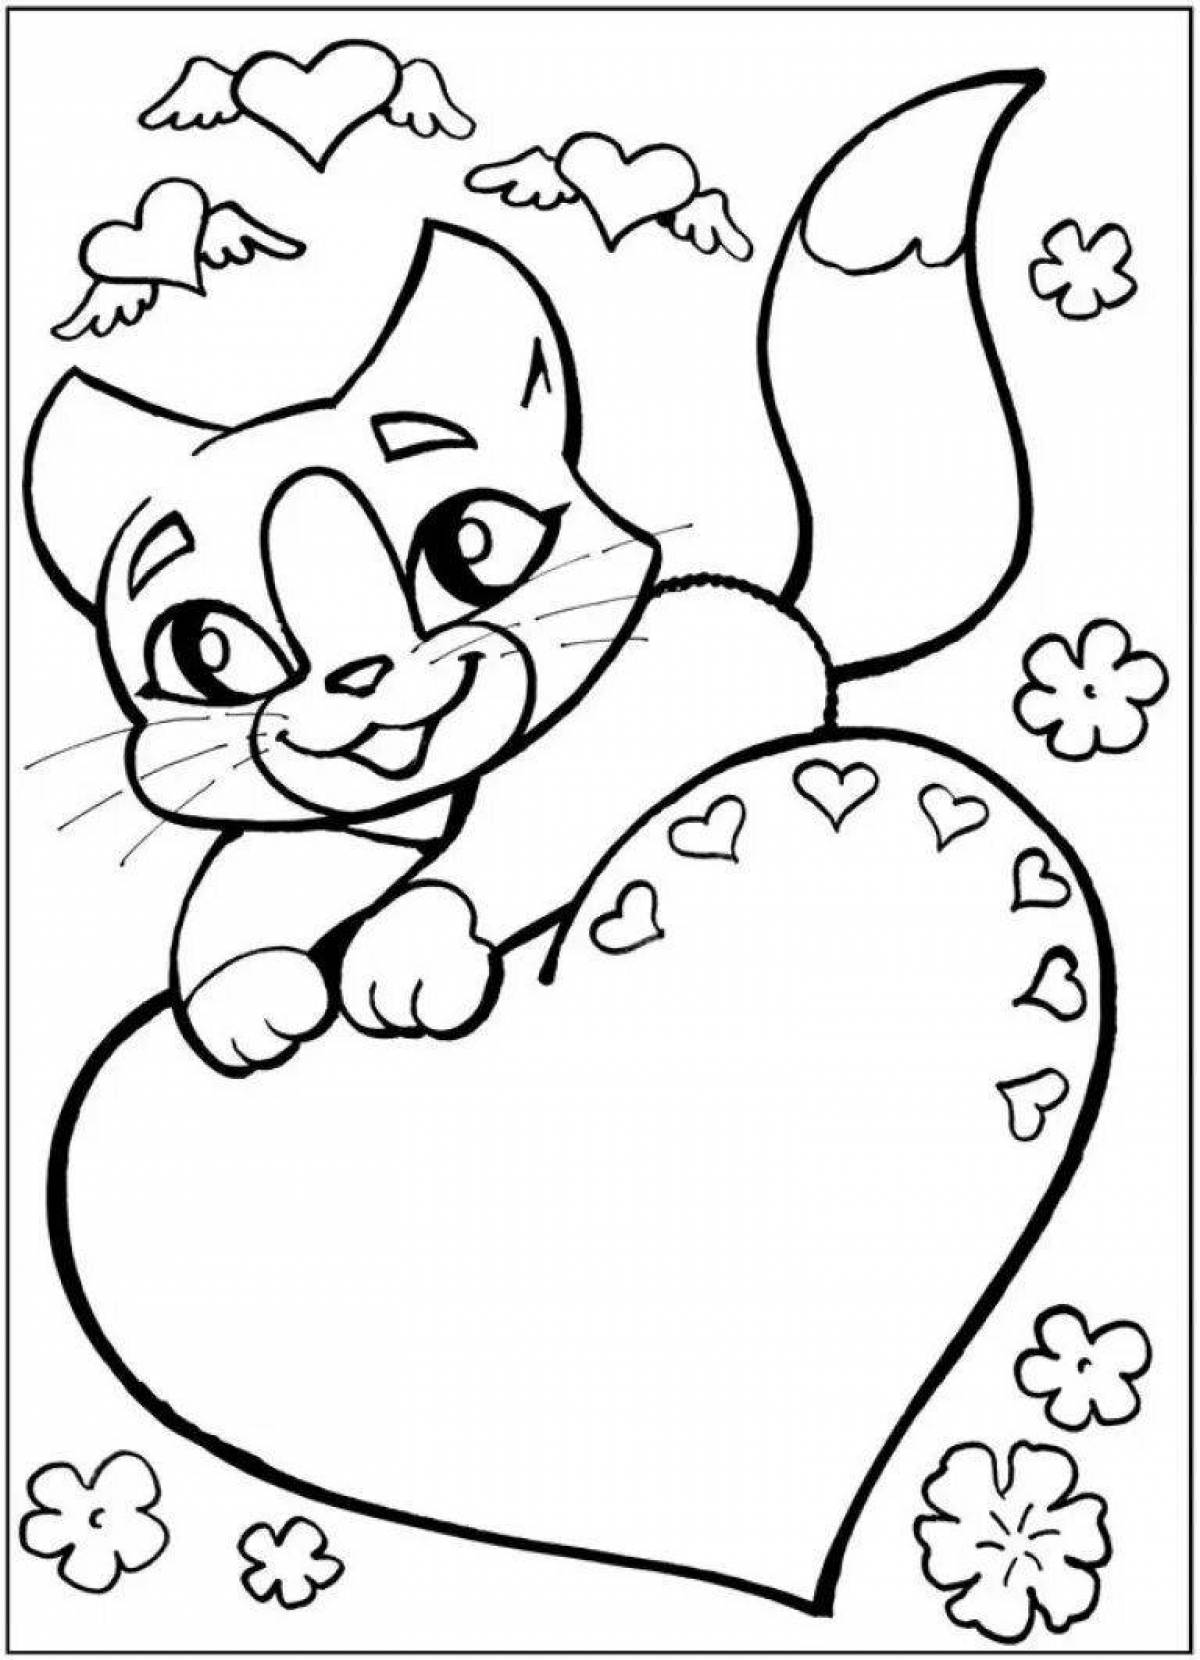 Amazing valentine coloring pages for valentine's day for kids